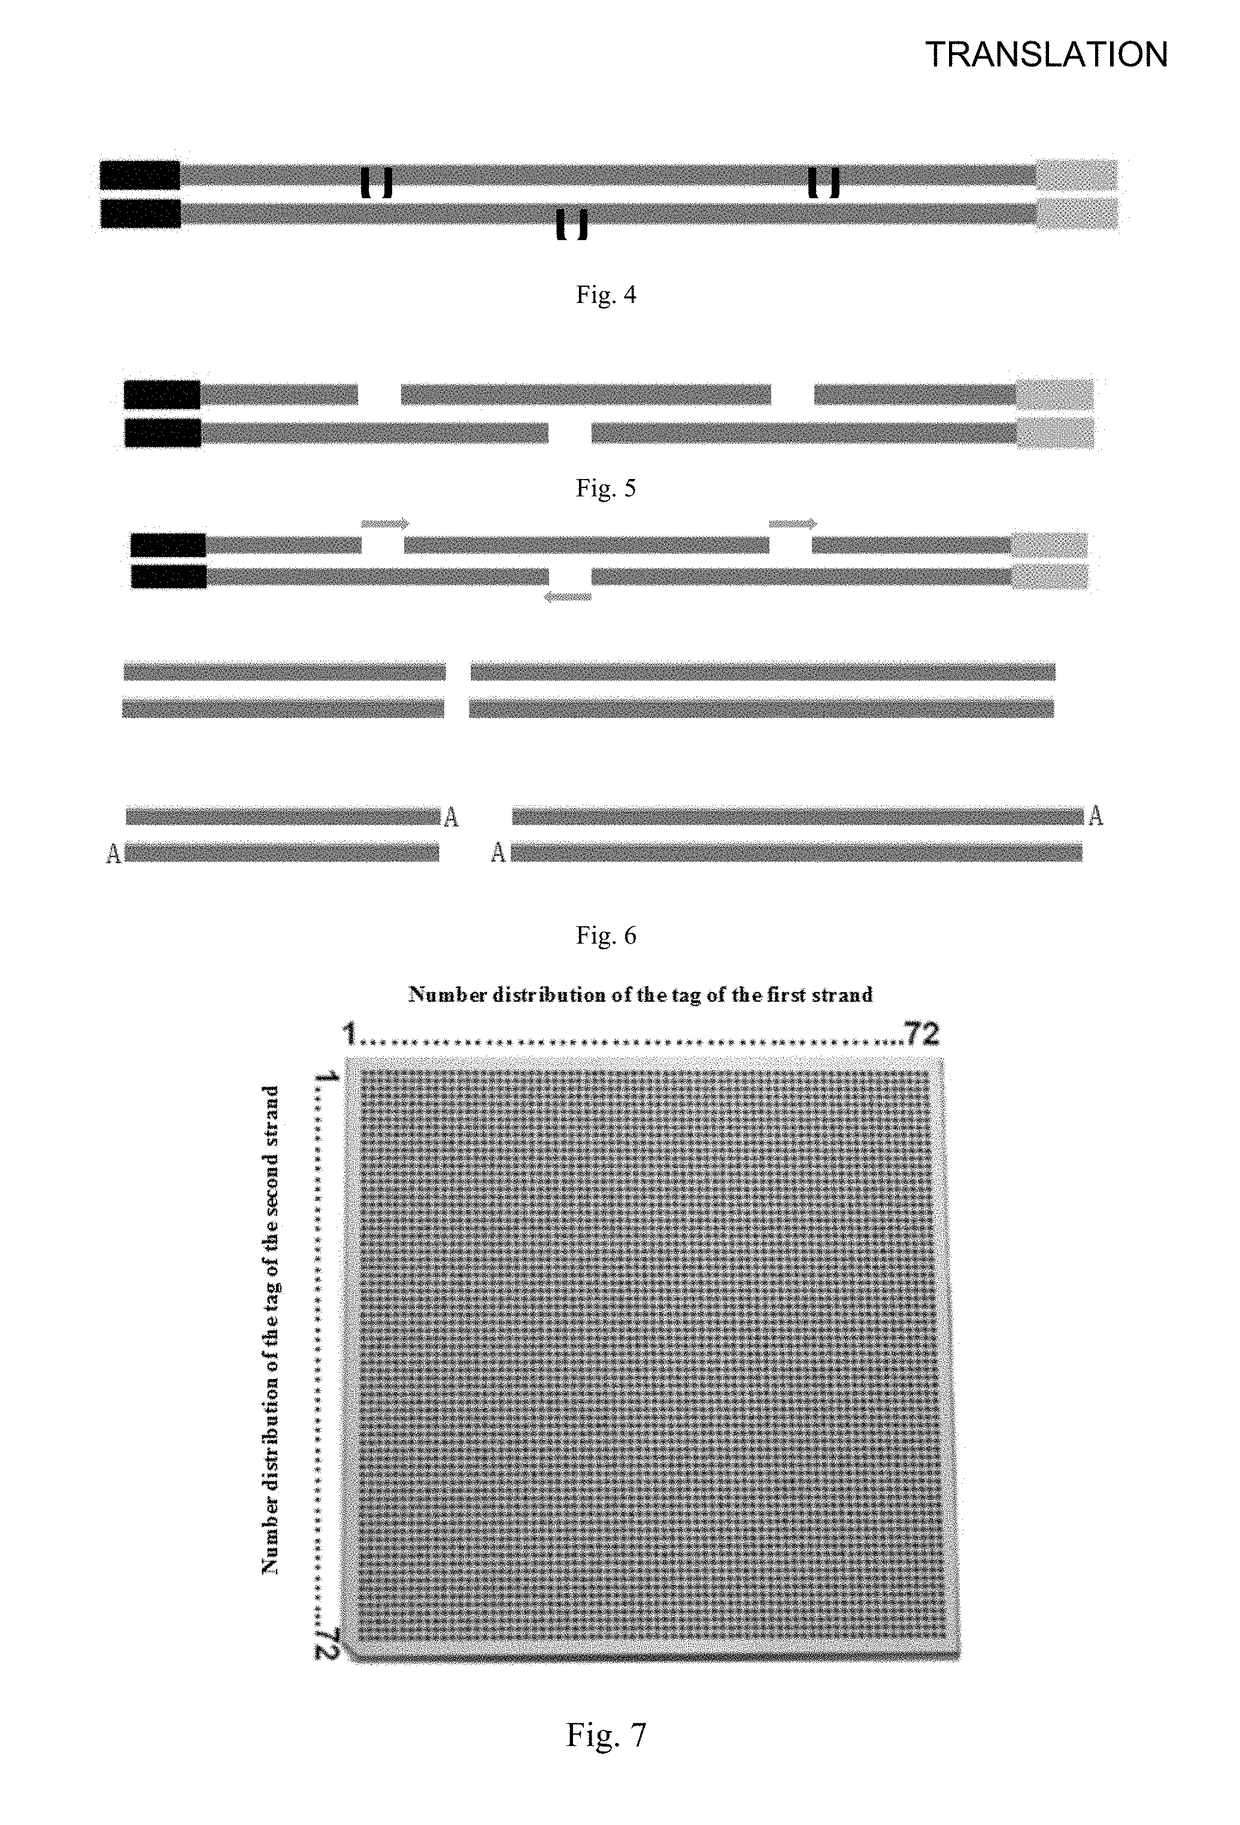 Method for constructing long fragment DNA library